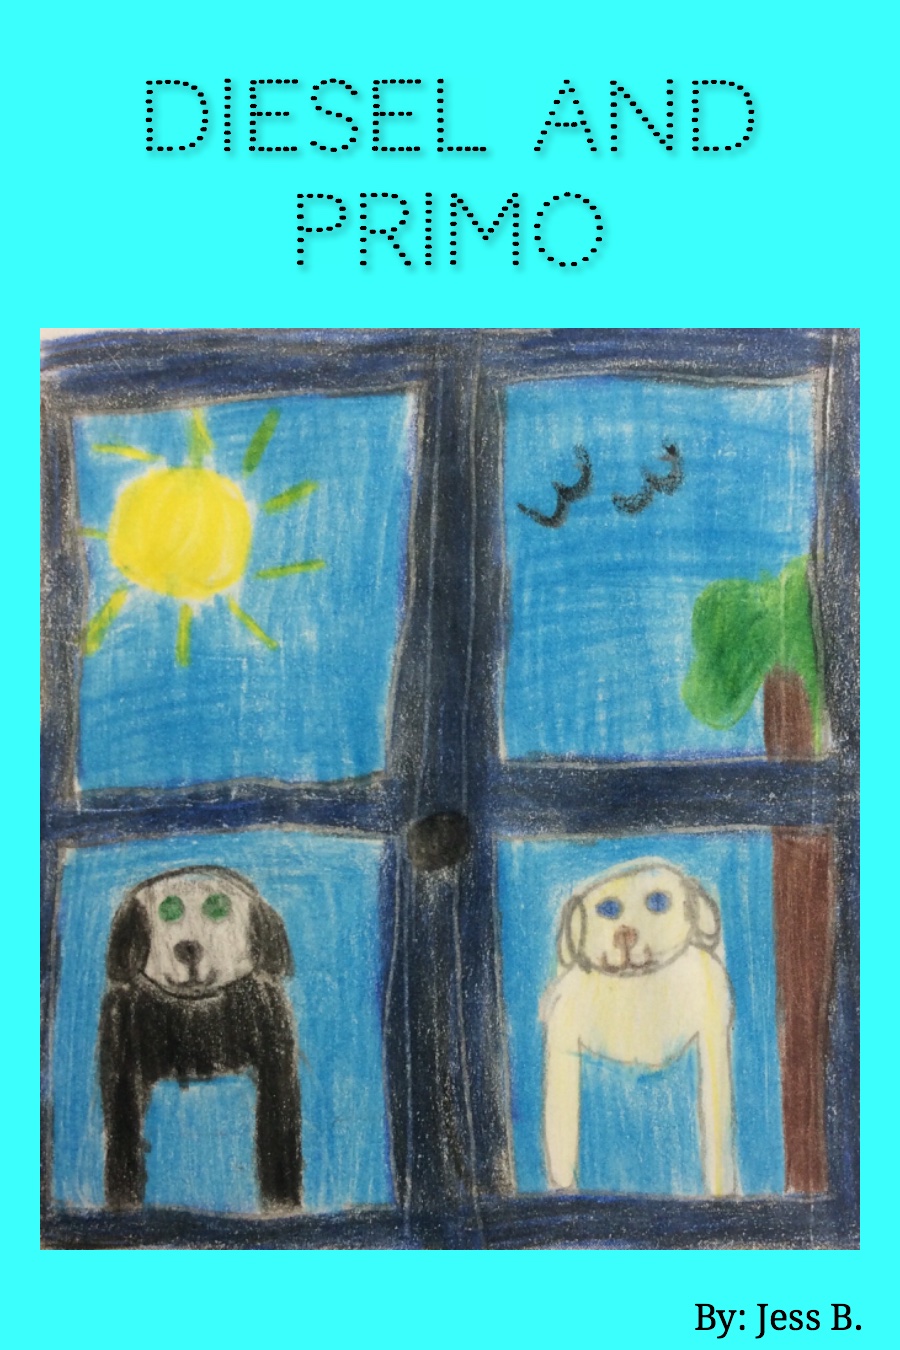 Diesel and Primo by Jess